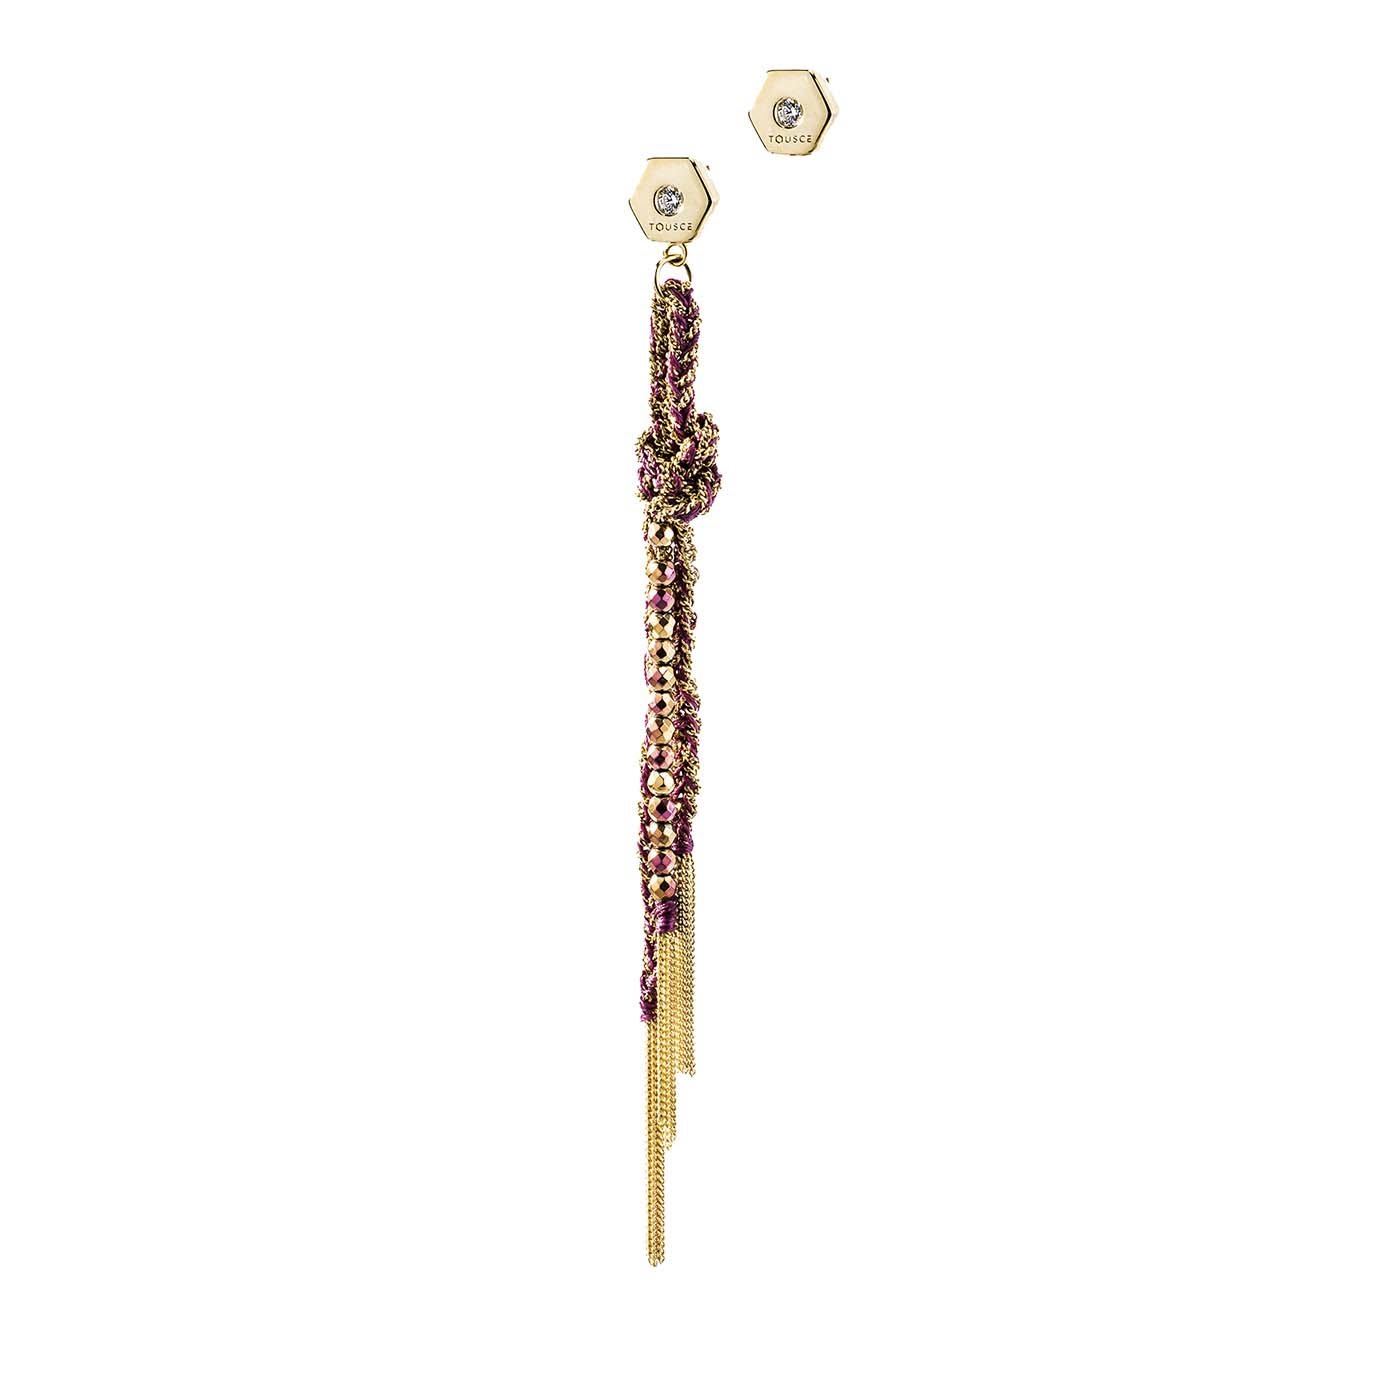 Beehive Earring and Stud in Yellow Gold and Fuchsia Silk - Touscé